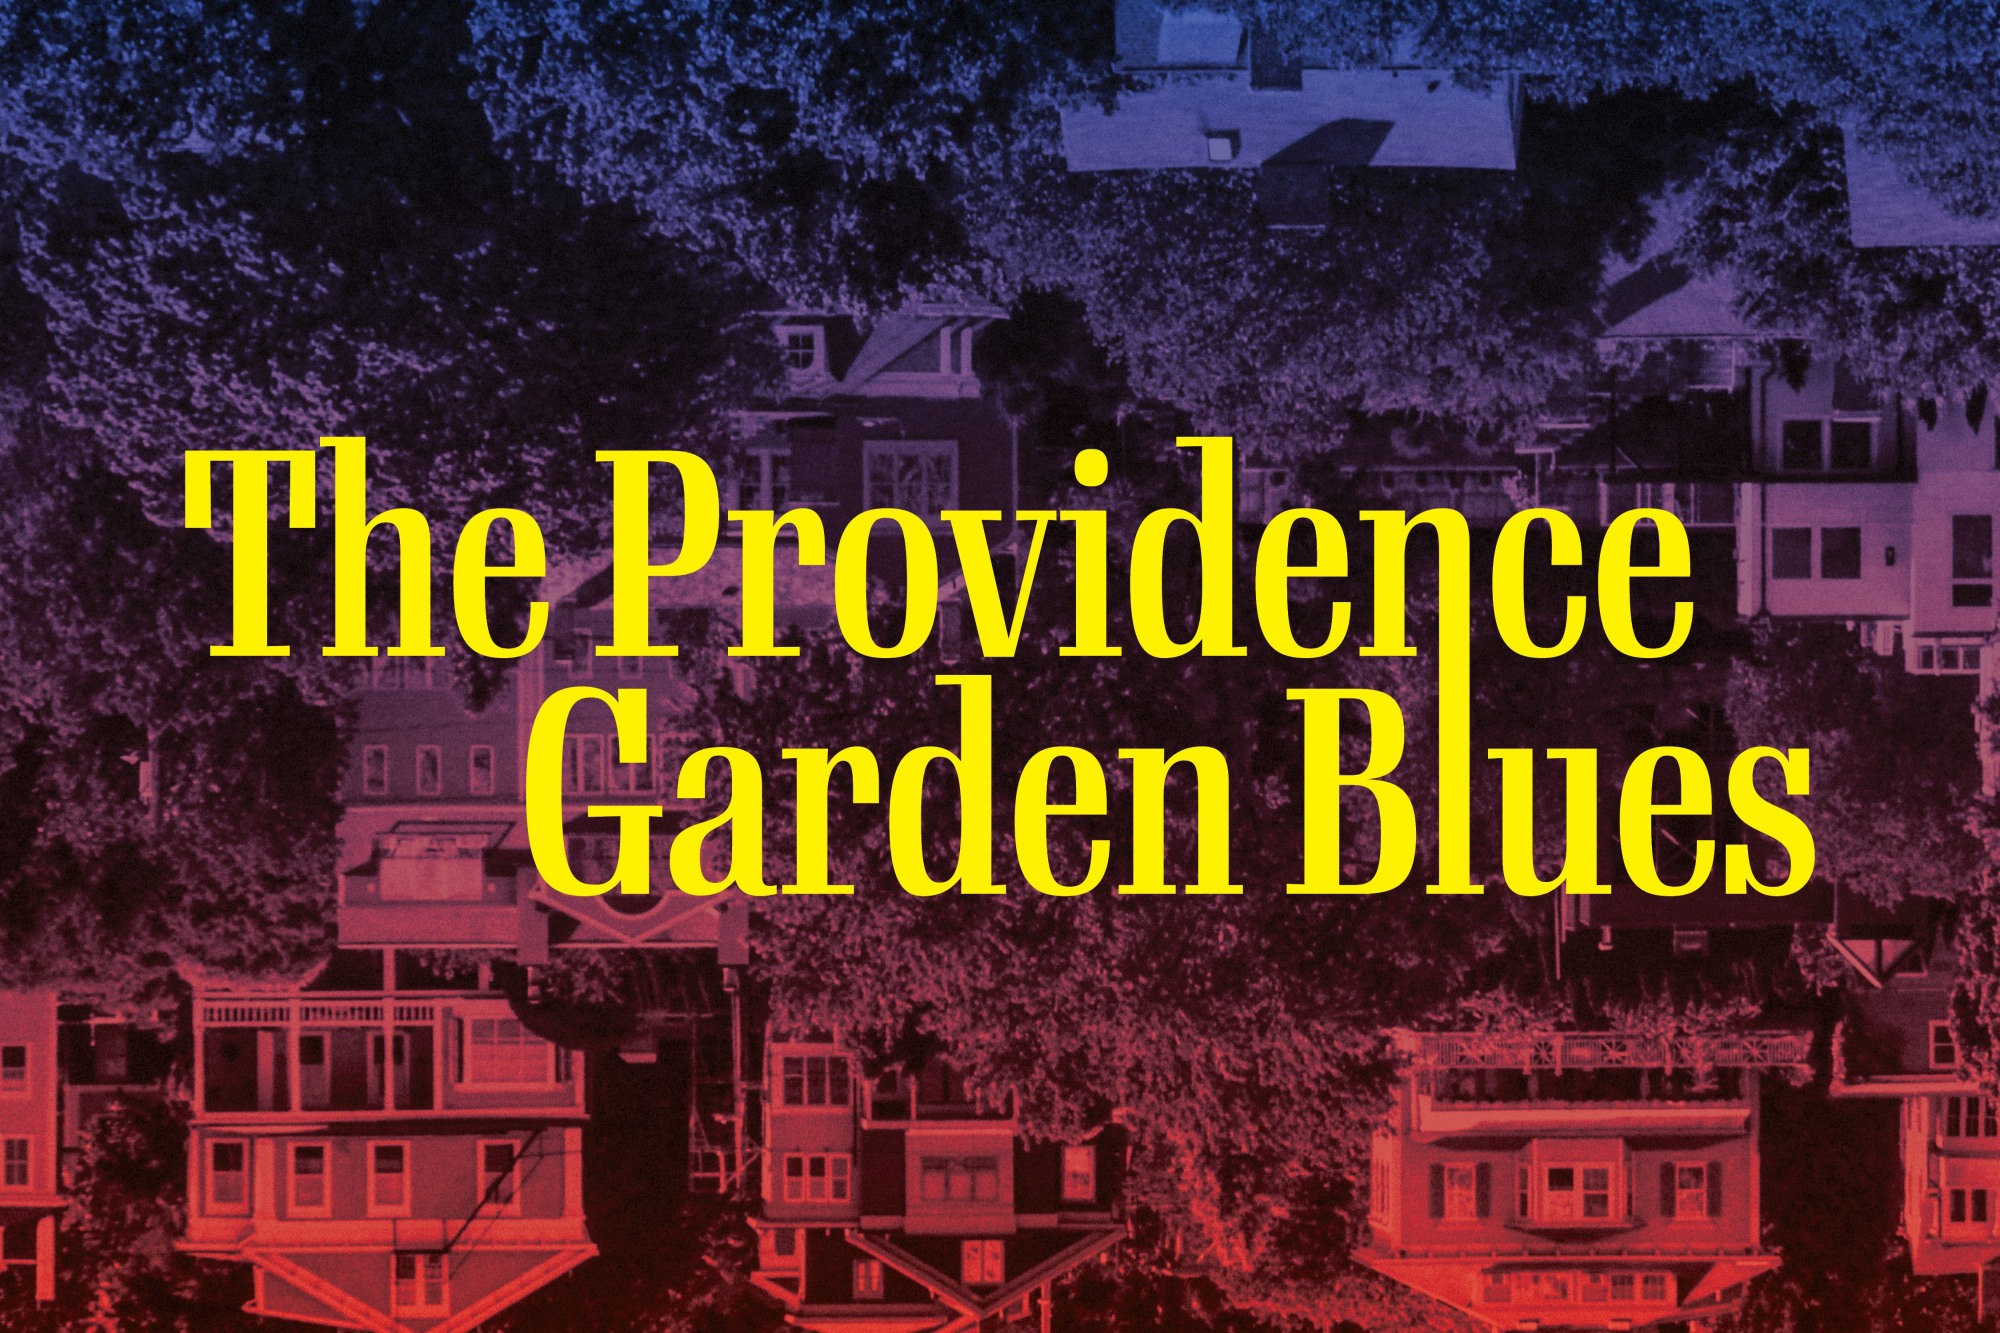 The Providence Garden Blues on a background of upside down houses in a gradient of purple to pink